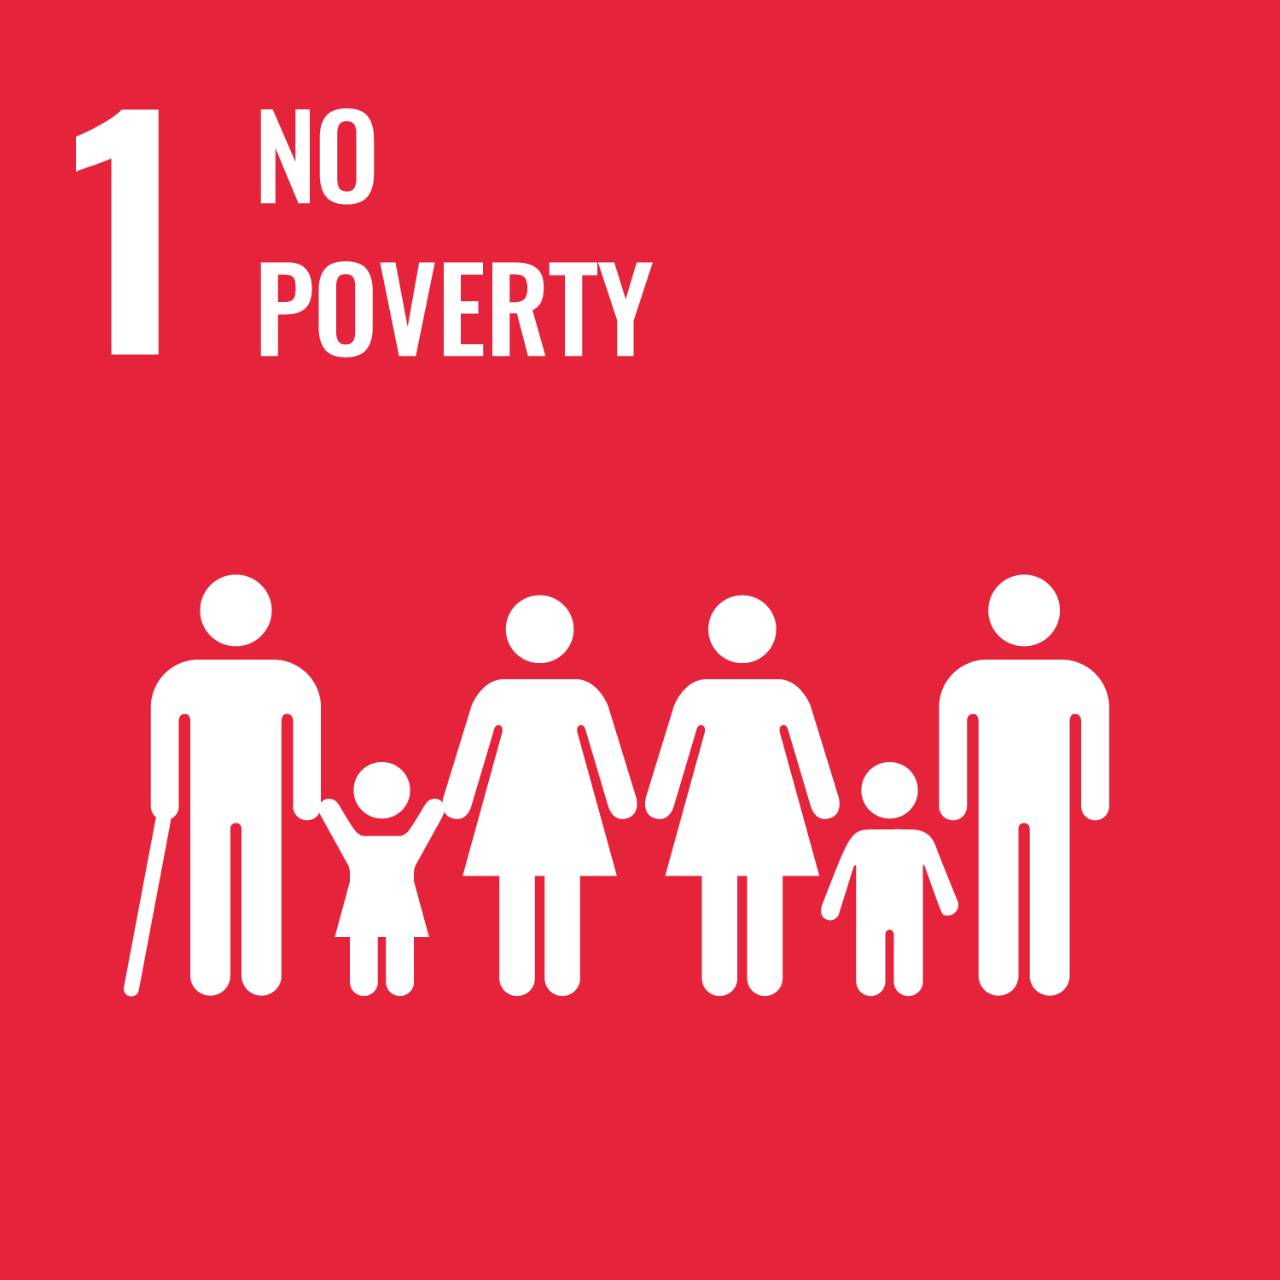 Red icon with graphic of people to represent UNSDG Goal 1: No Poverty.